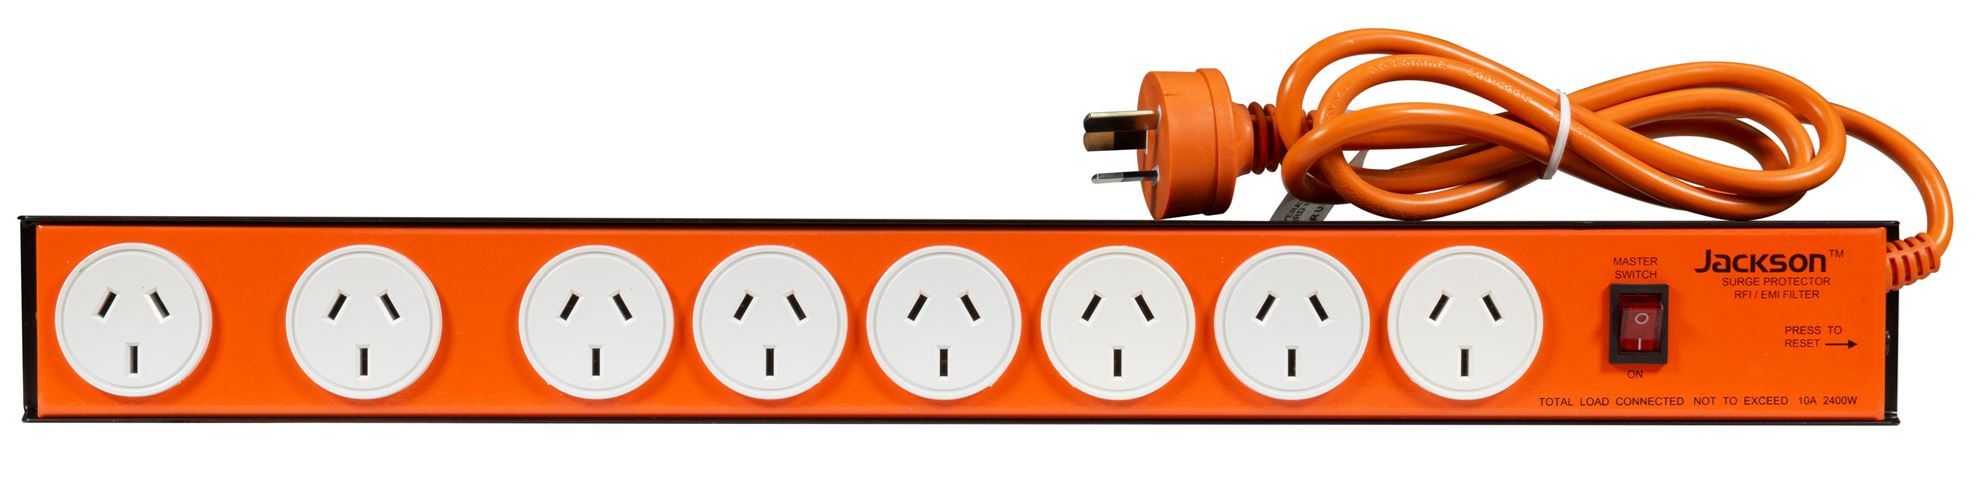 JACKSON 8 Outlet Powerboard Metal Housing, Surge Protection, RFI Filtration